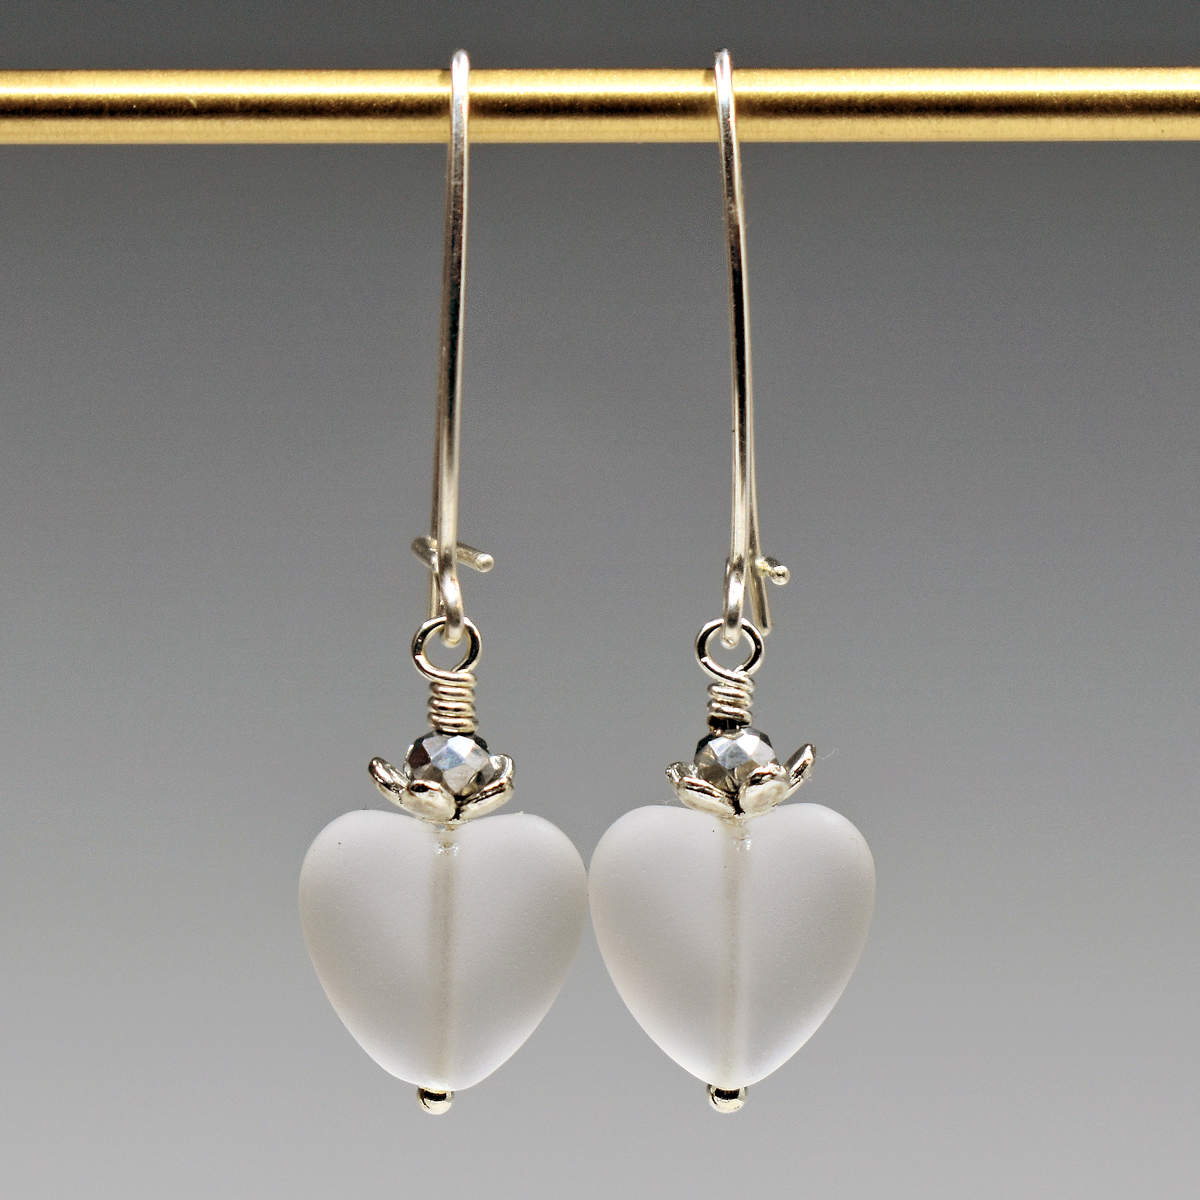 A pair of earrings hang from a gold bar, against a gray background. The earrings have long silver oval wires that latch and small frosted clear glass hearts at the bottom.